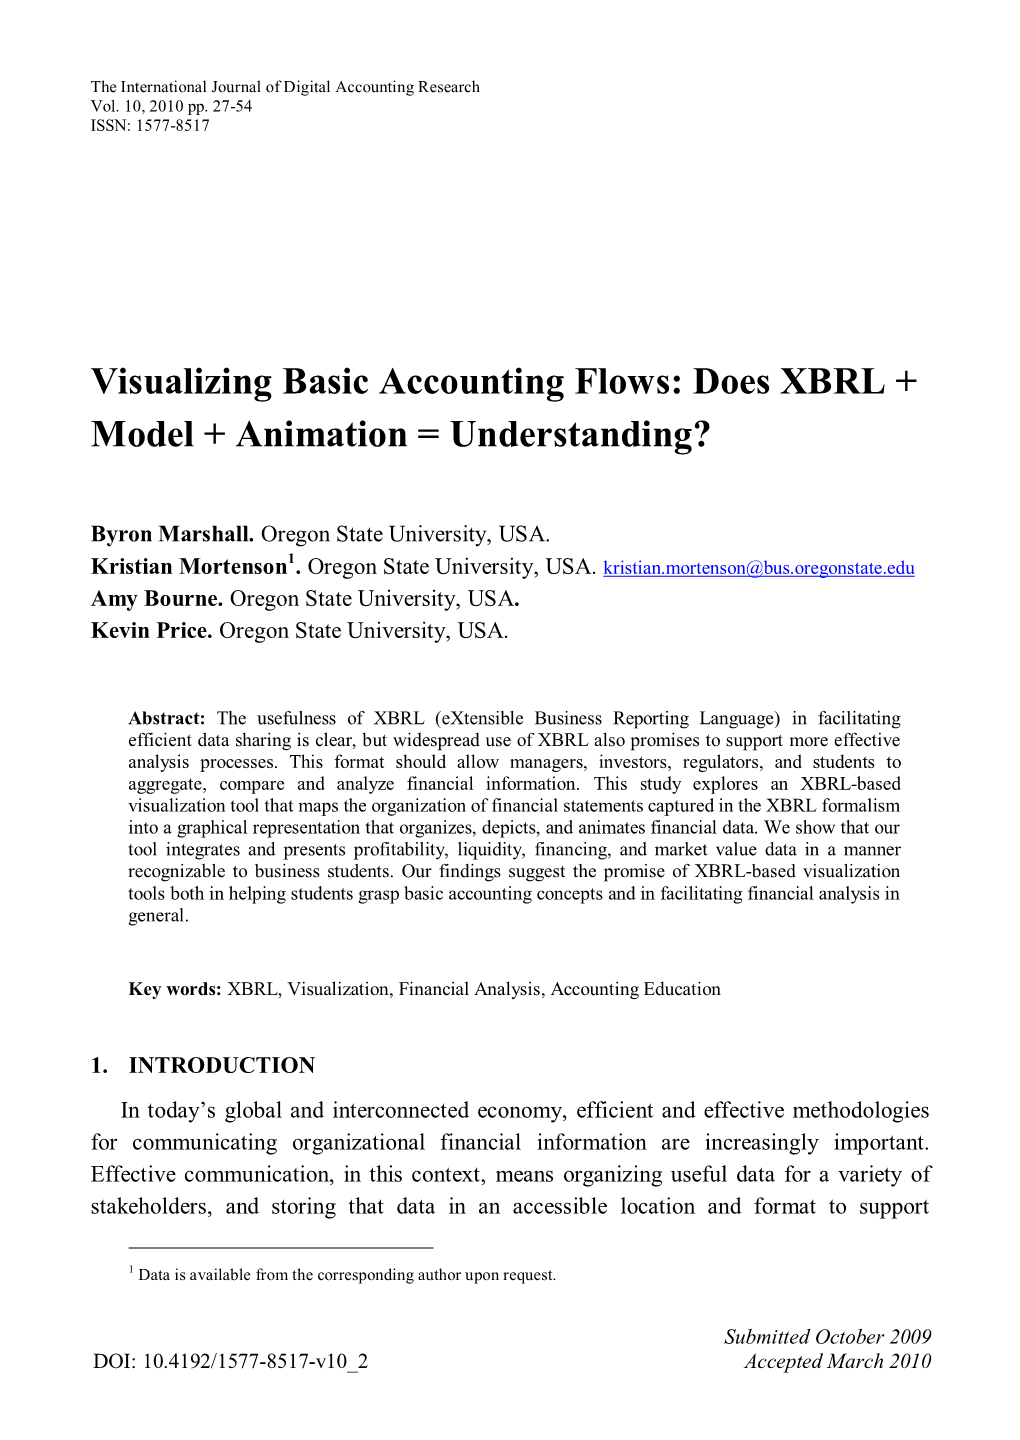 Visualizing Basic Accounting Flows: Does XBRL + Model + Animation = Understanding?